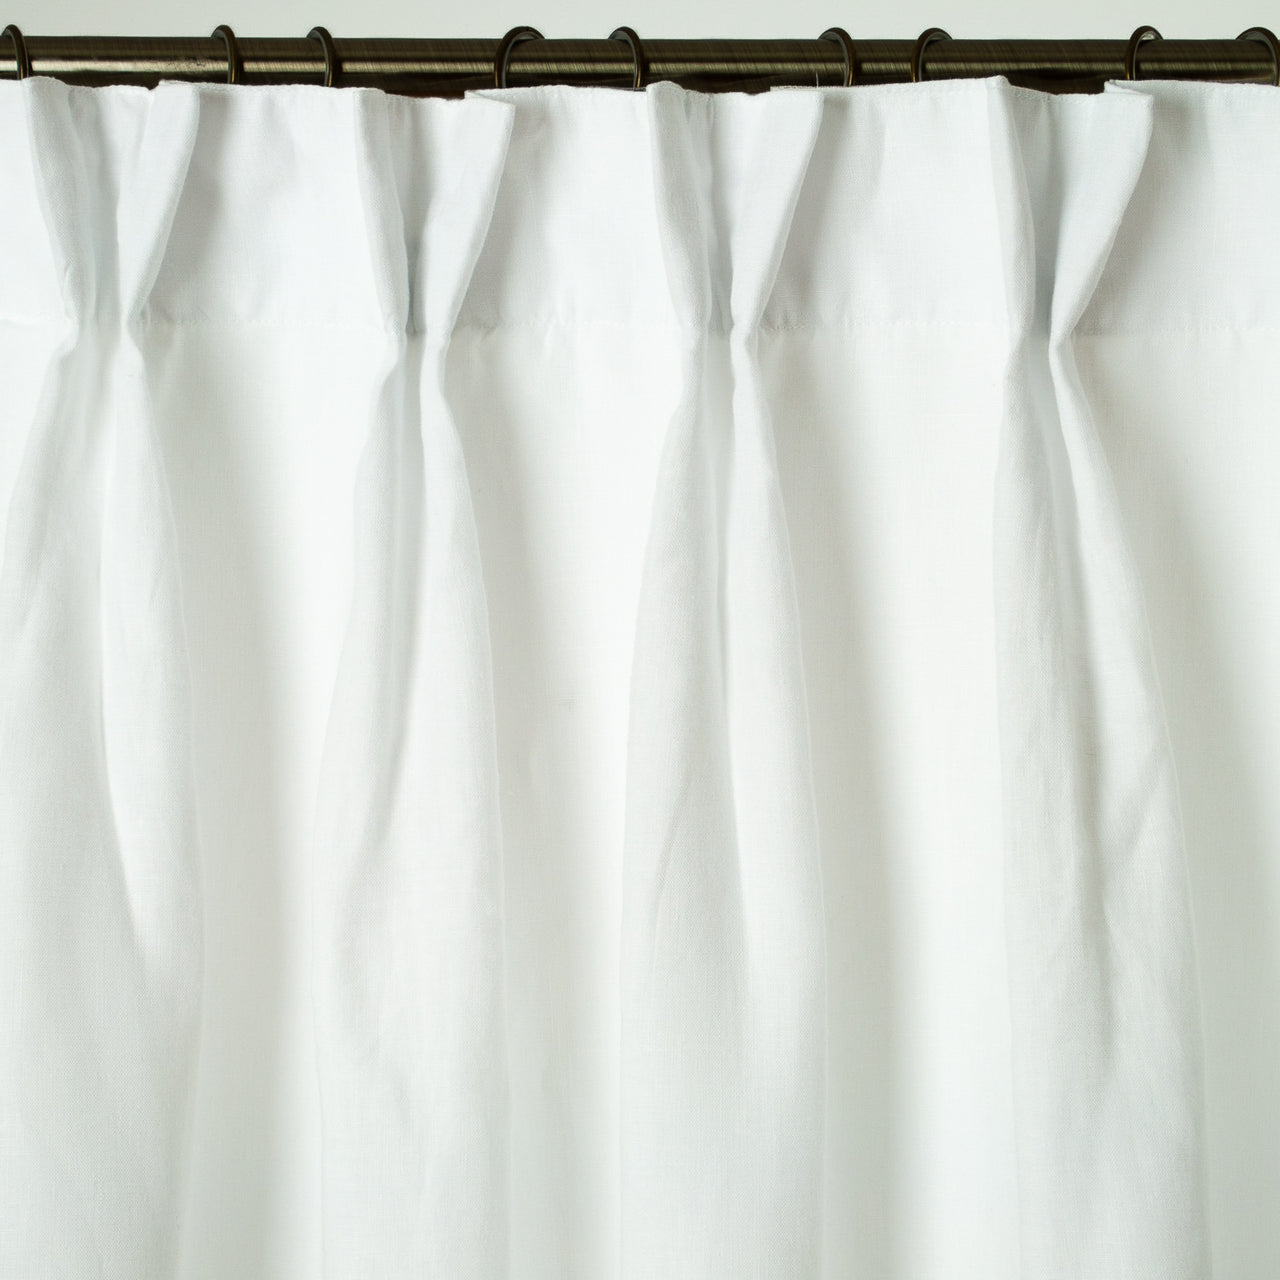 Dutch Pleat Linen Curtain Panel with Cotton or Blackout Lining - Heading for Rings and Hooks